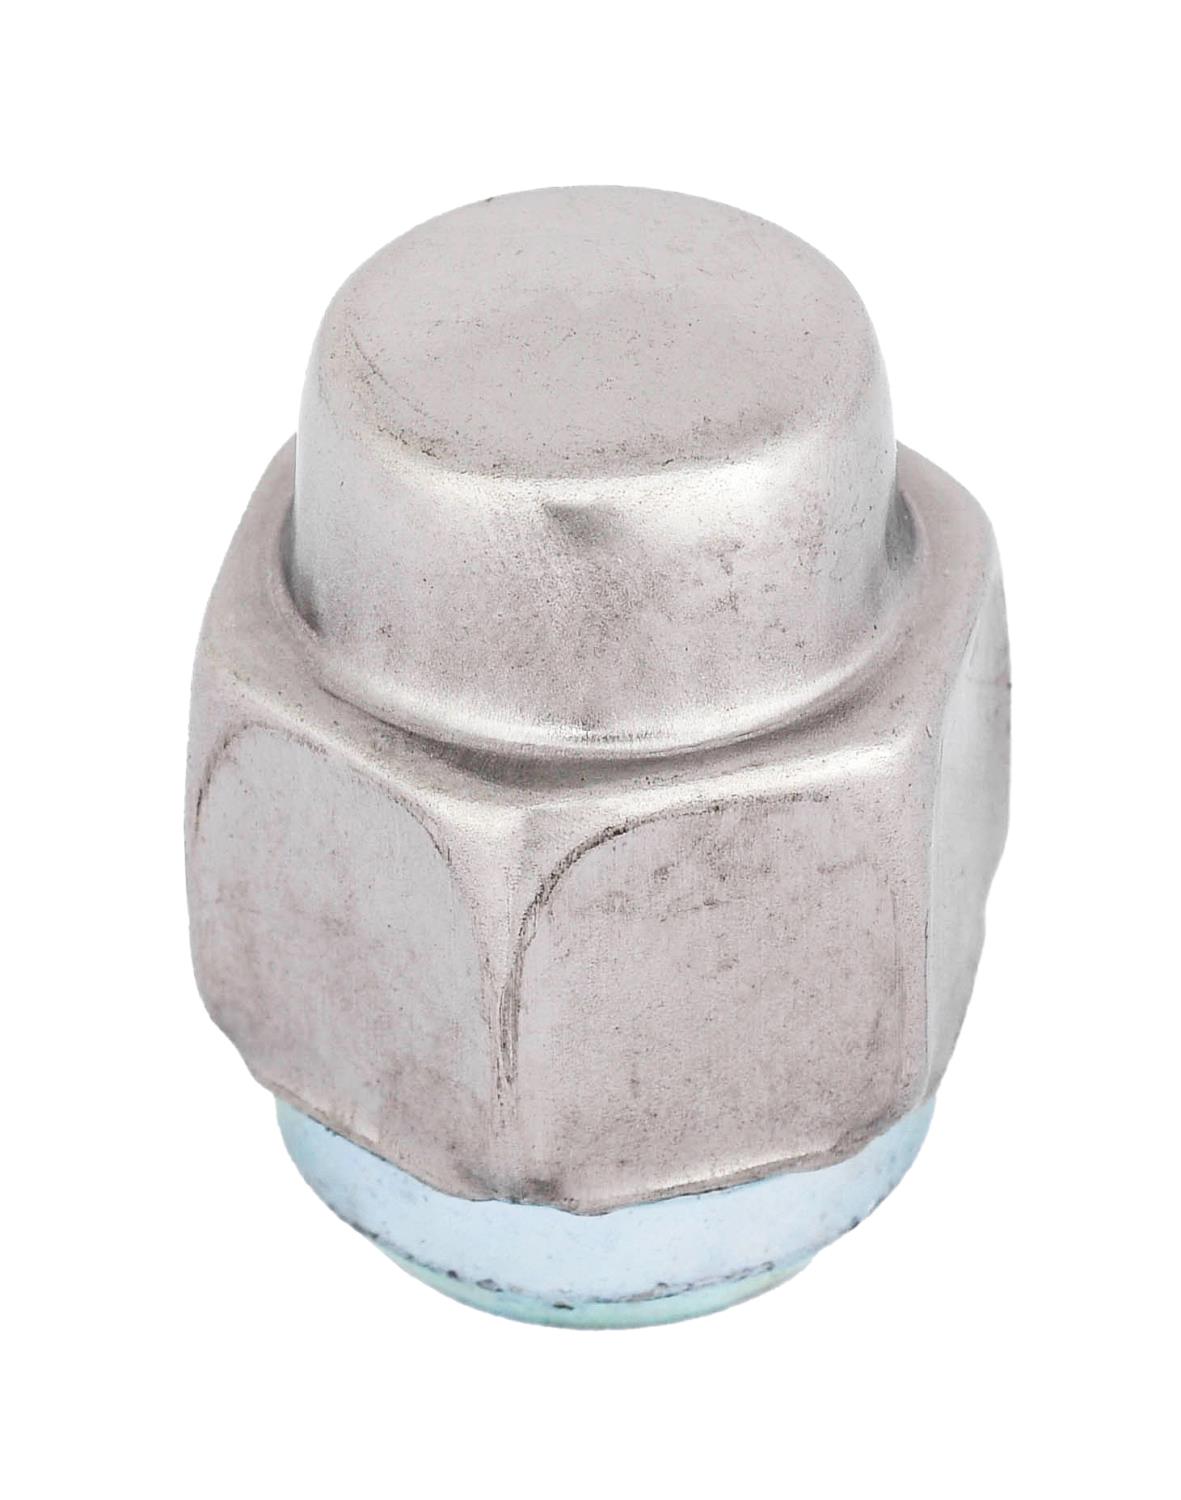 Wheel Lug Nut for Stainless Steel Wheels Fits Select 1967-1981 GM Models [Capped]